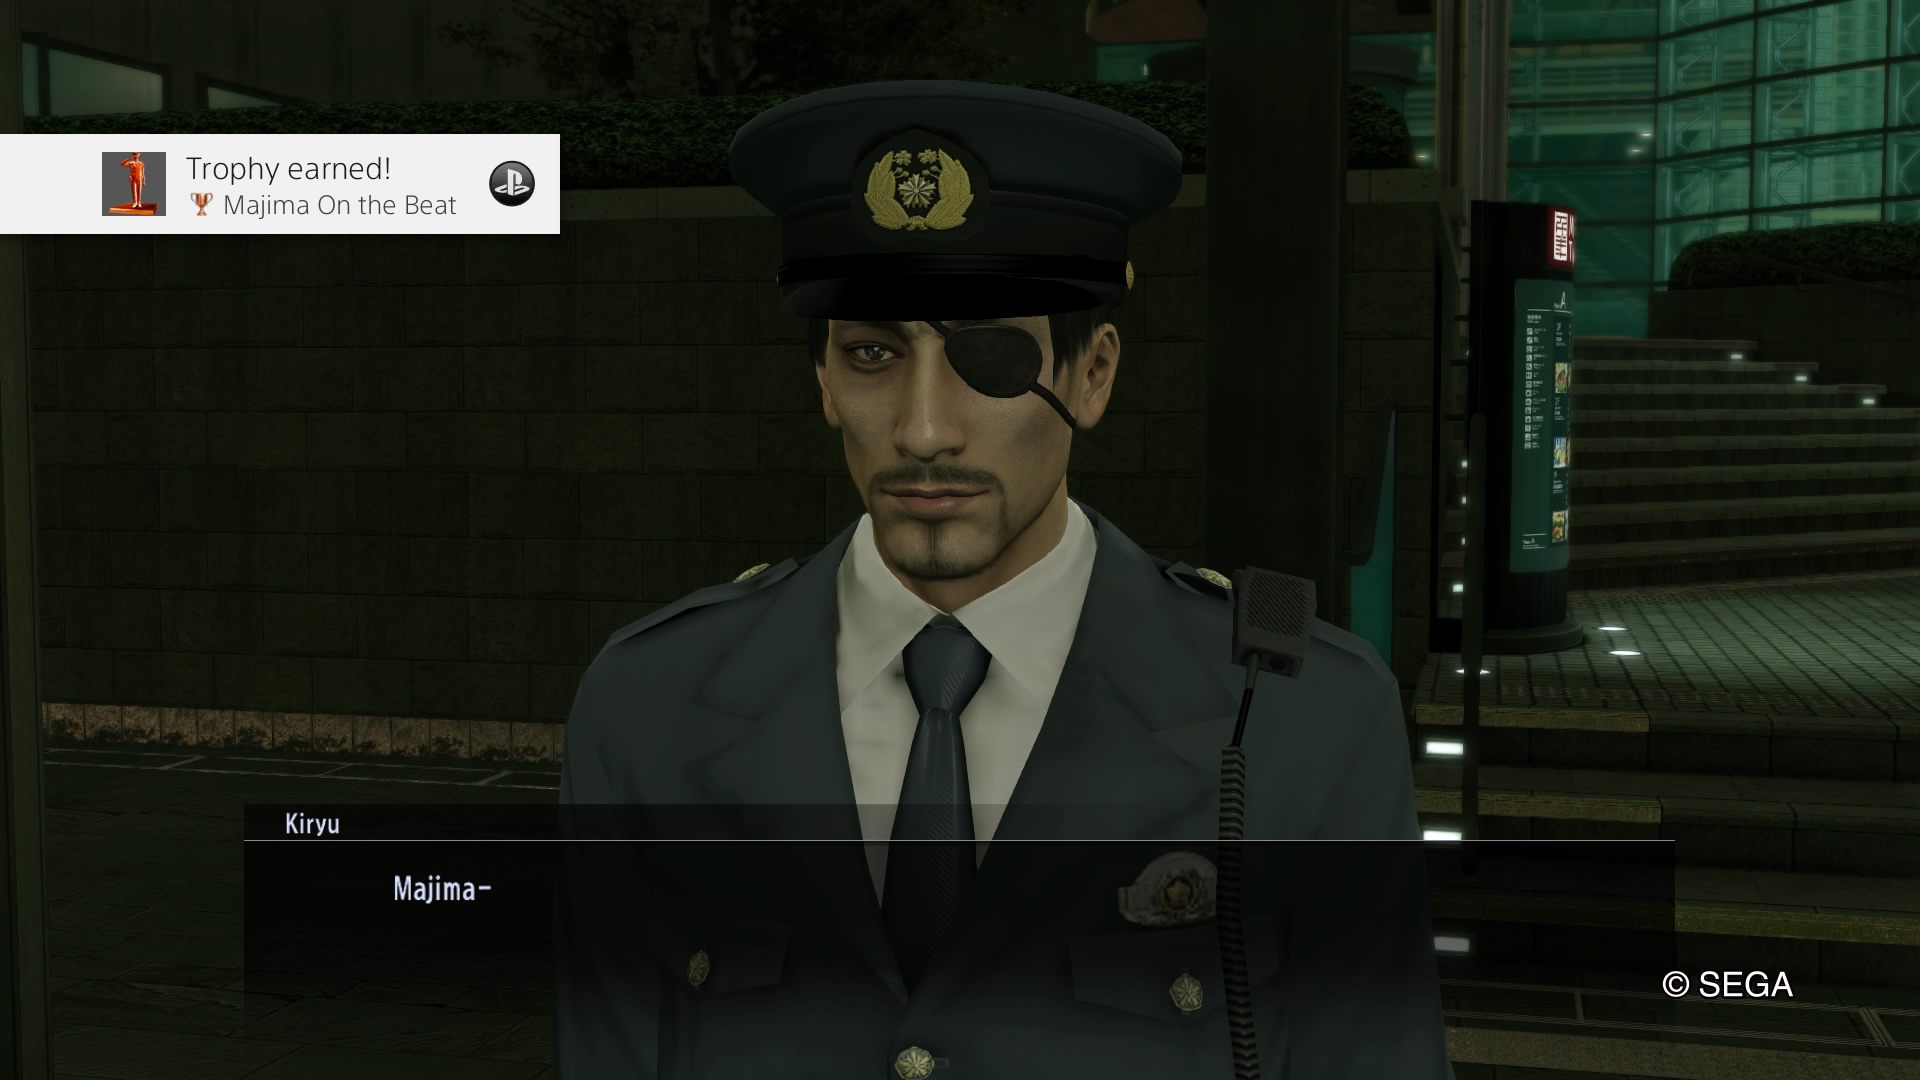 Aside from the mini-games, there’s also Majima Everywhere, which is annoyin...